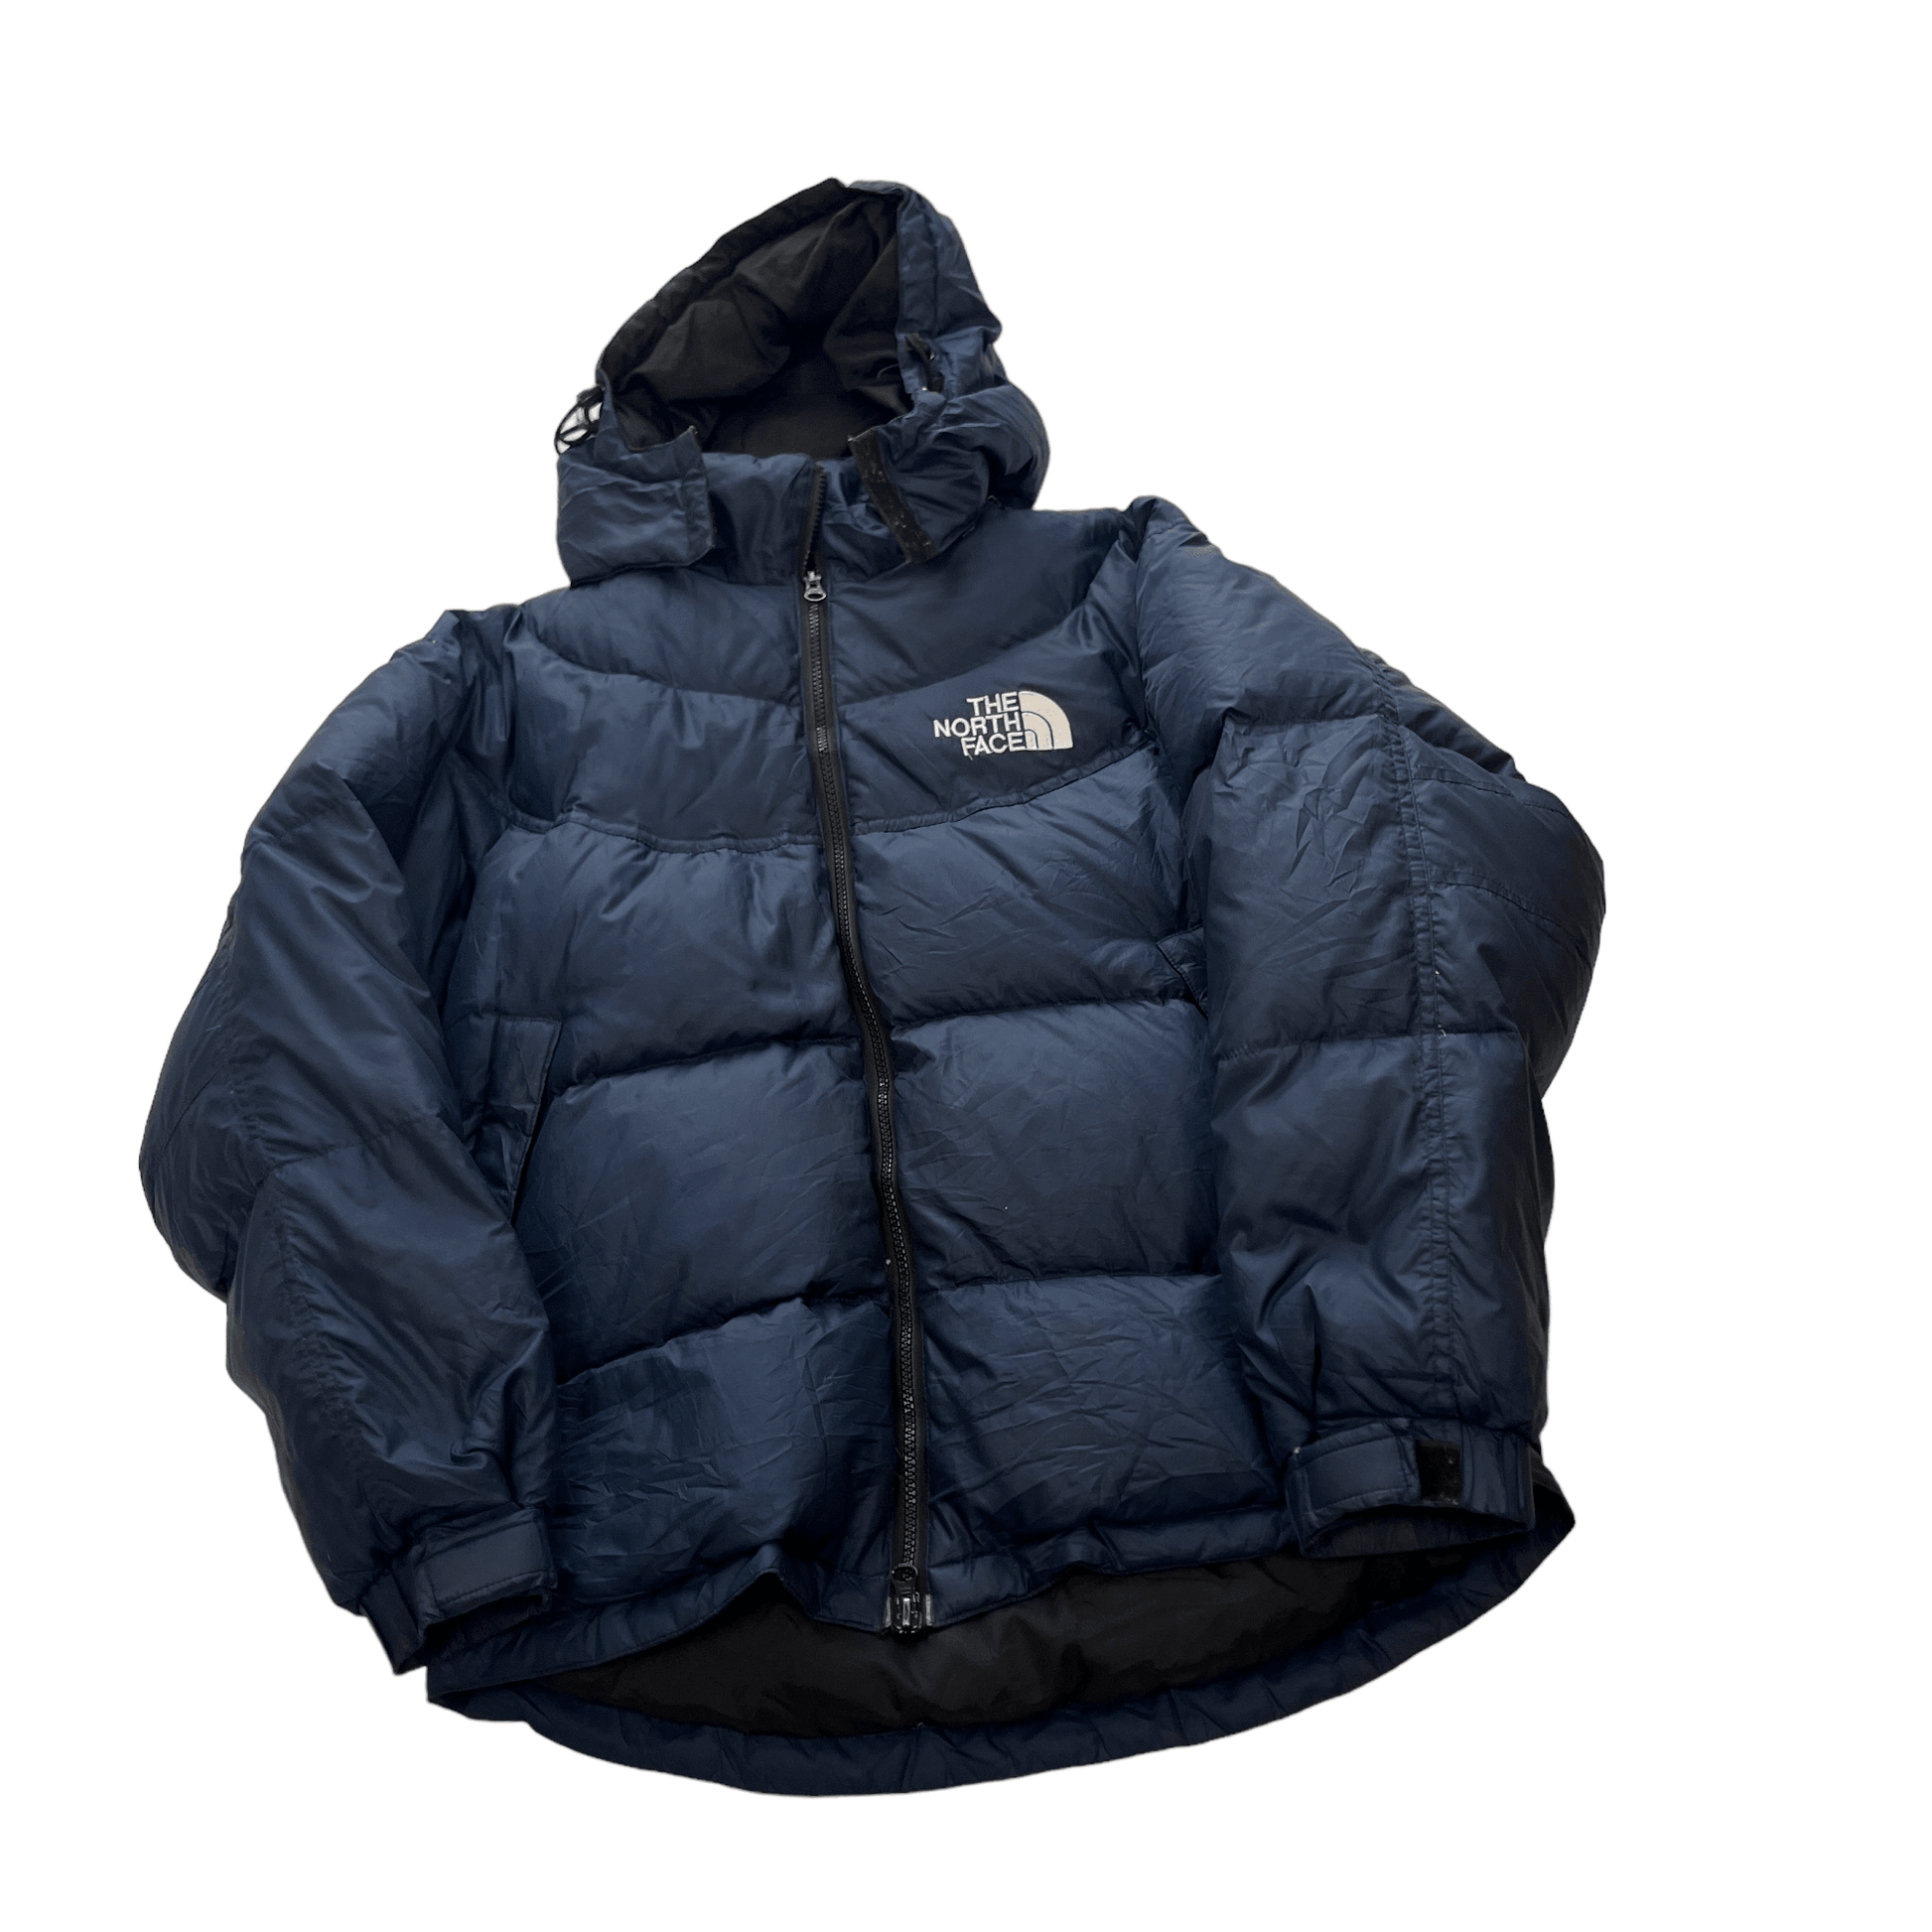 Vintage Navy Blue The North Face (TNF) Puffer Coat - Small - The Streetwear Studio